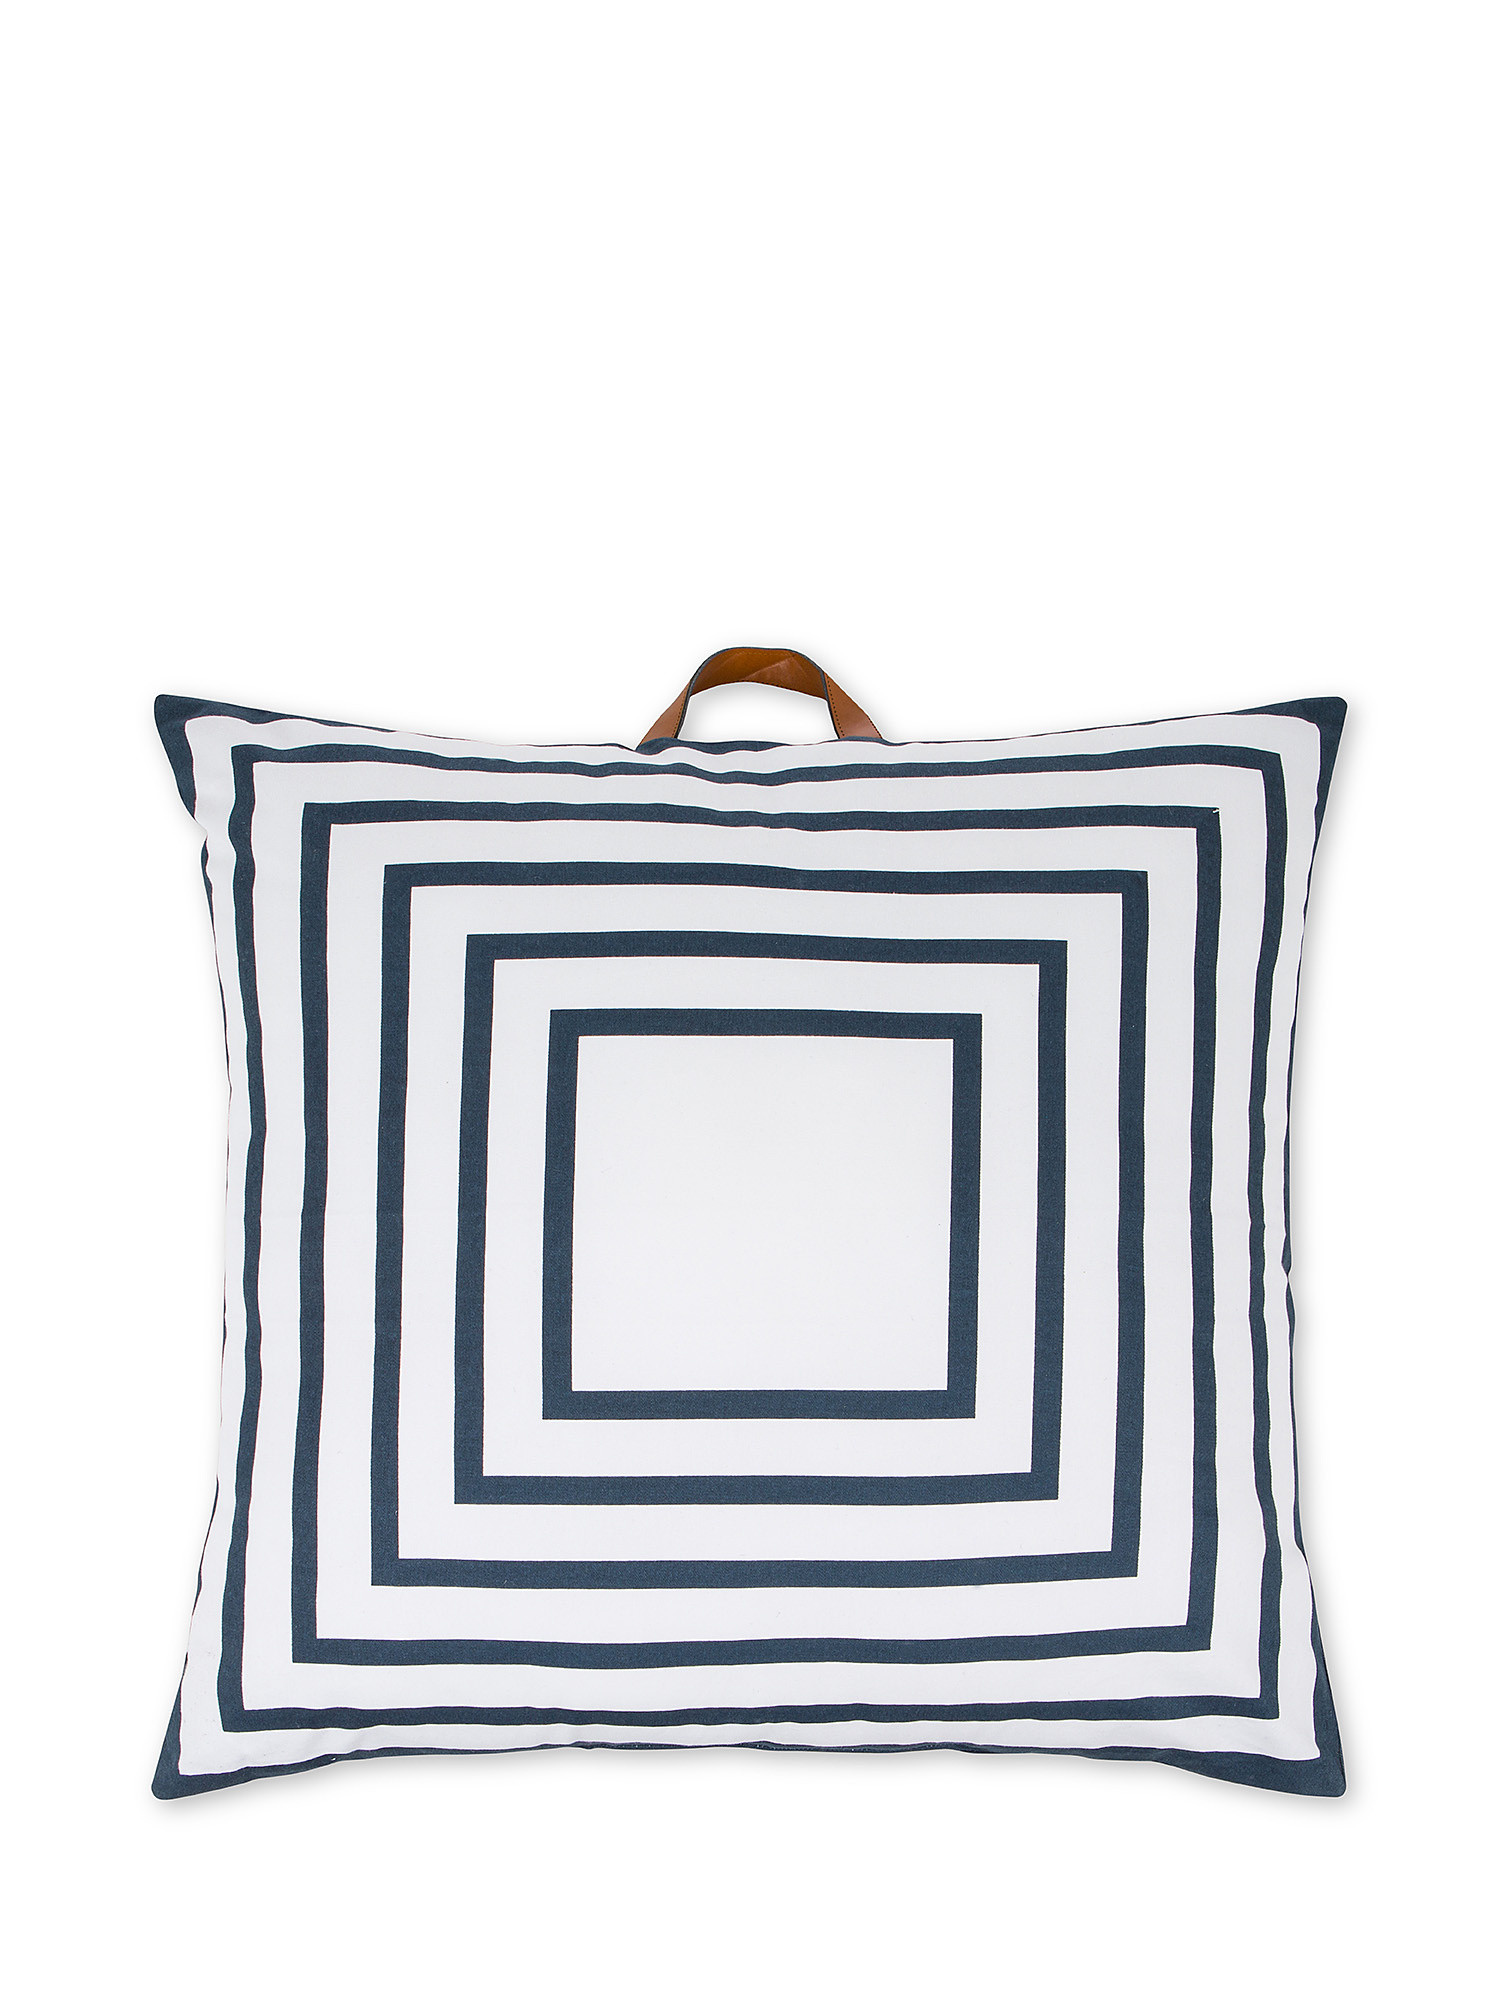 Cushion 70x70 cm with handles, White, large image number 0